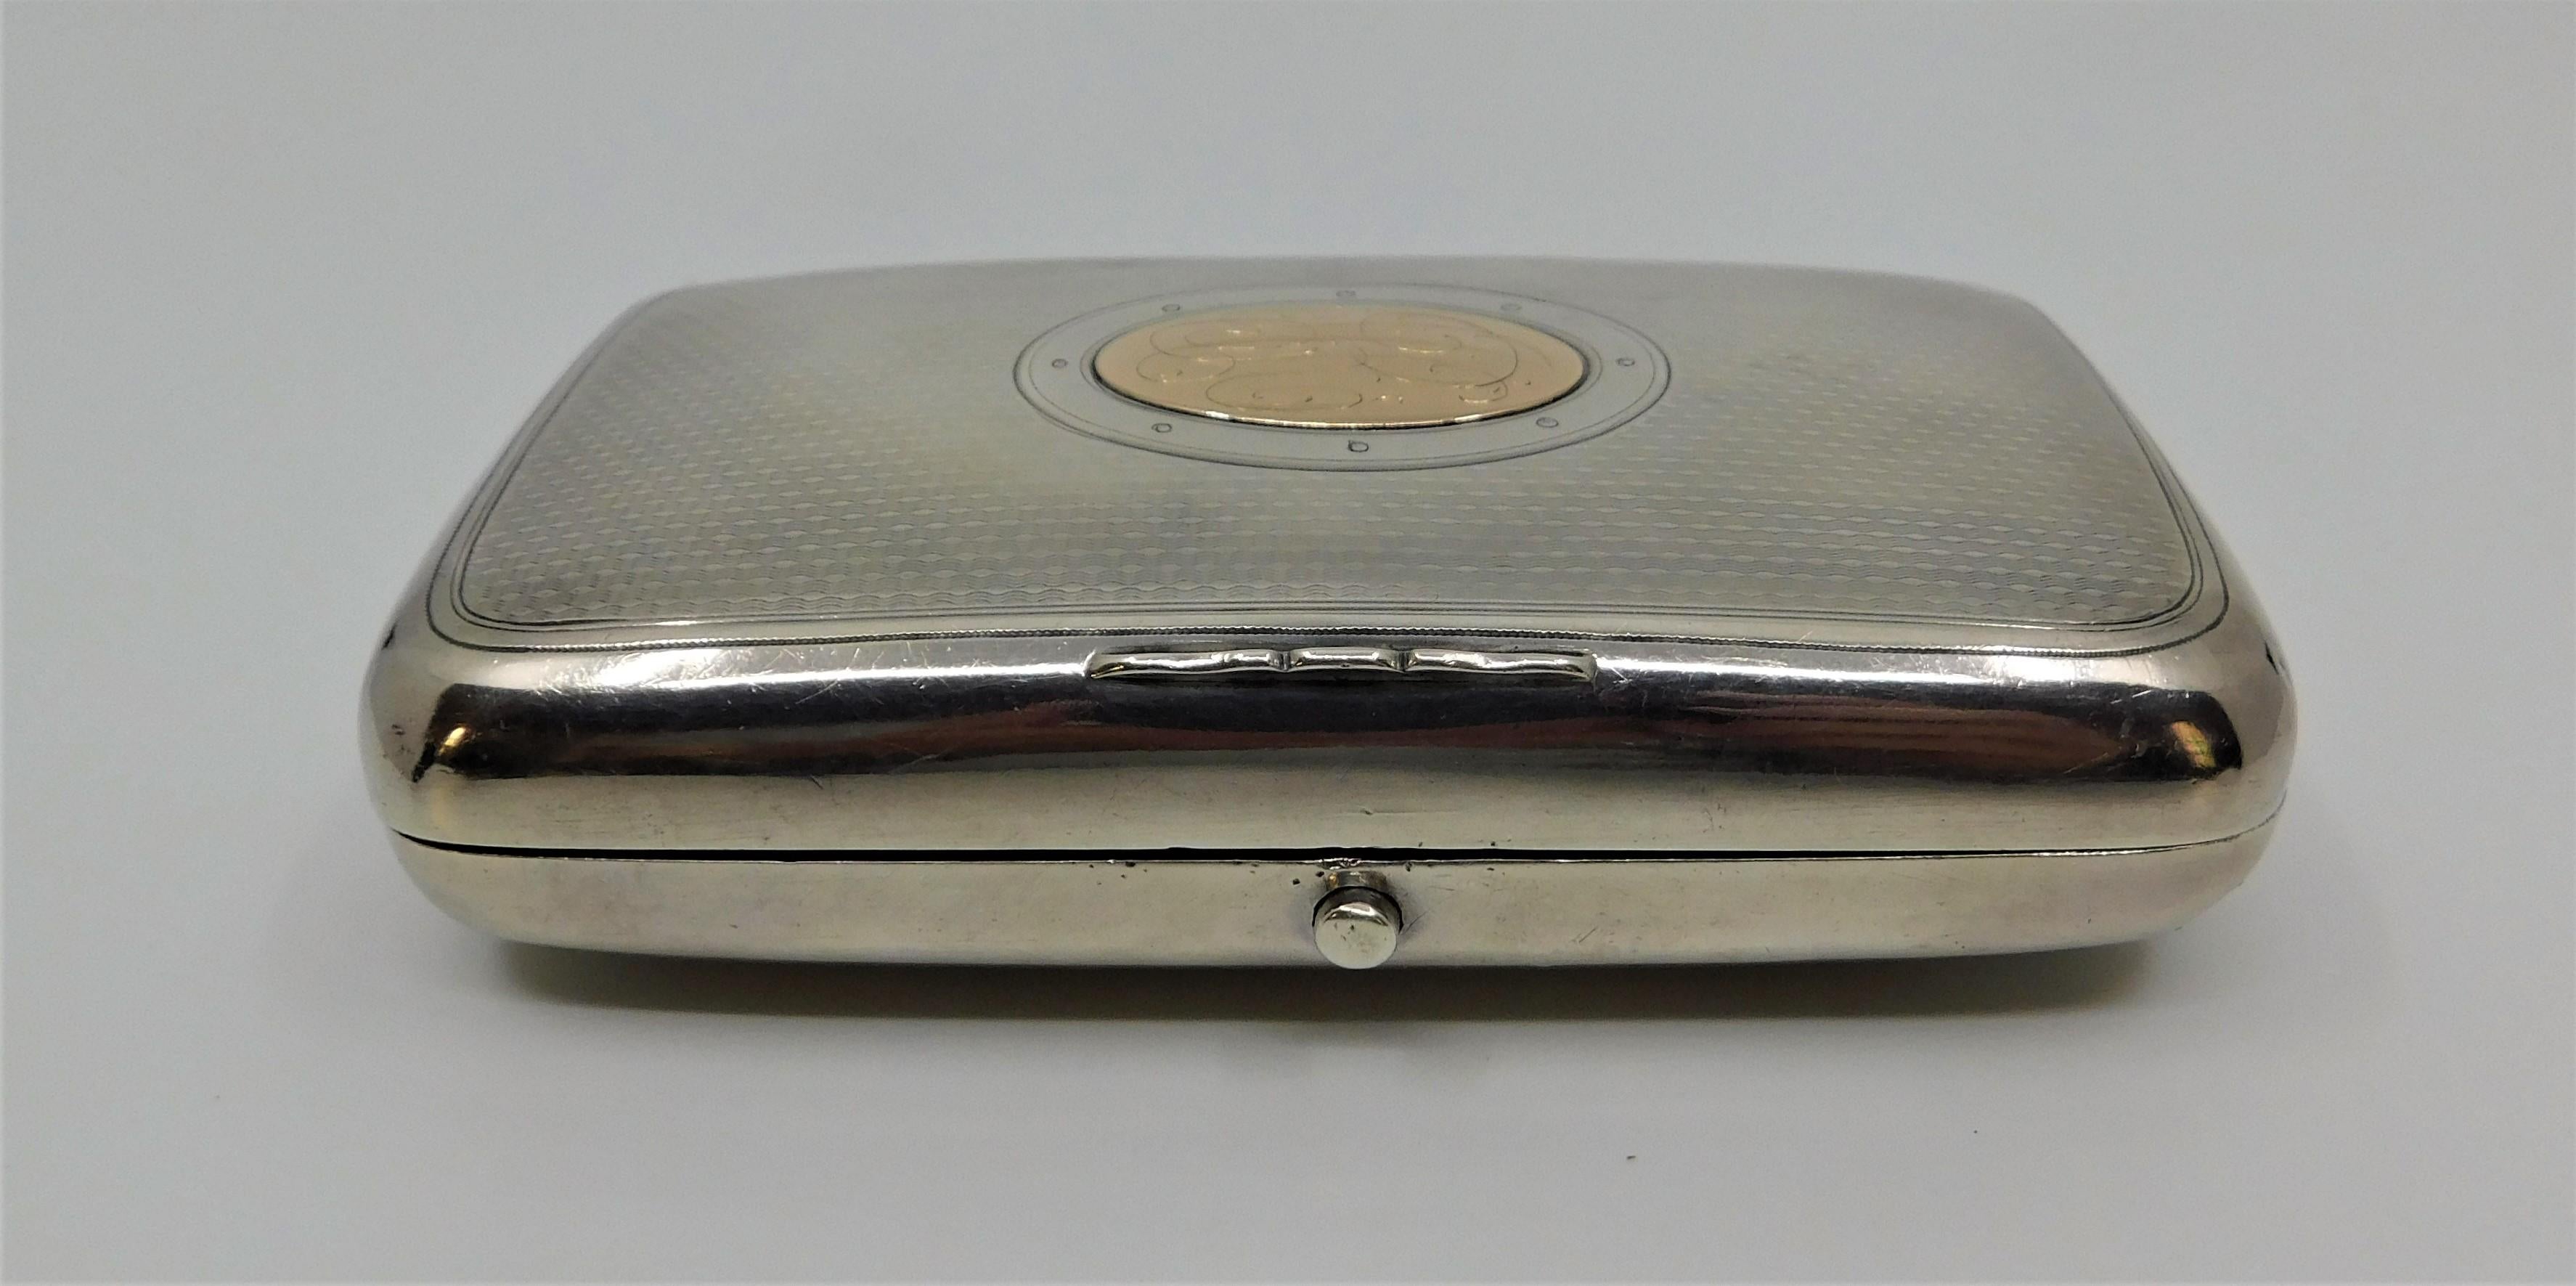 Early 20th century made in Russia silver cigarette case with a gold monogrammed central medallion.